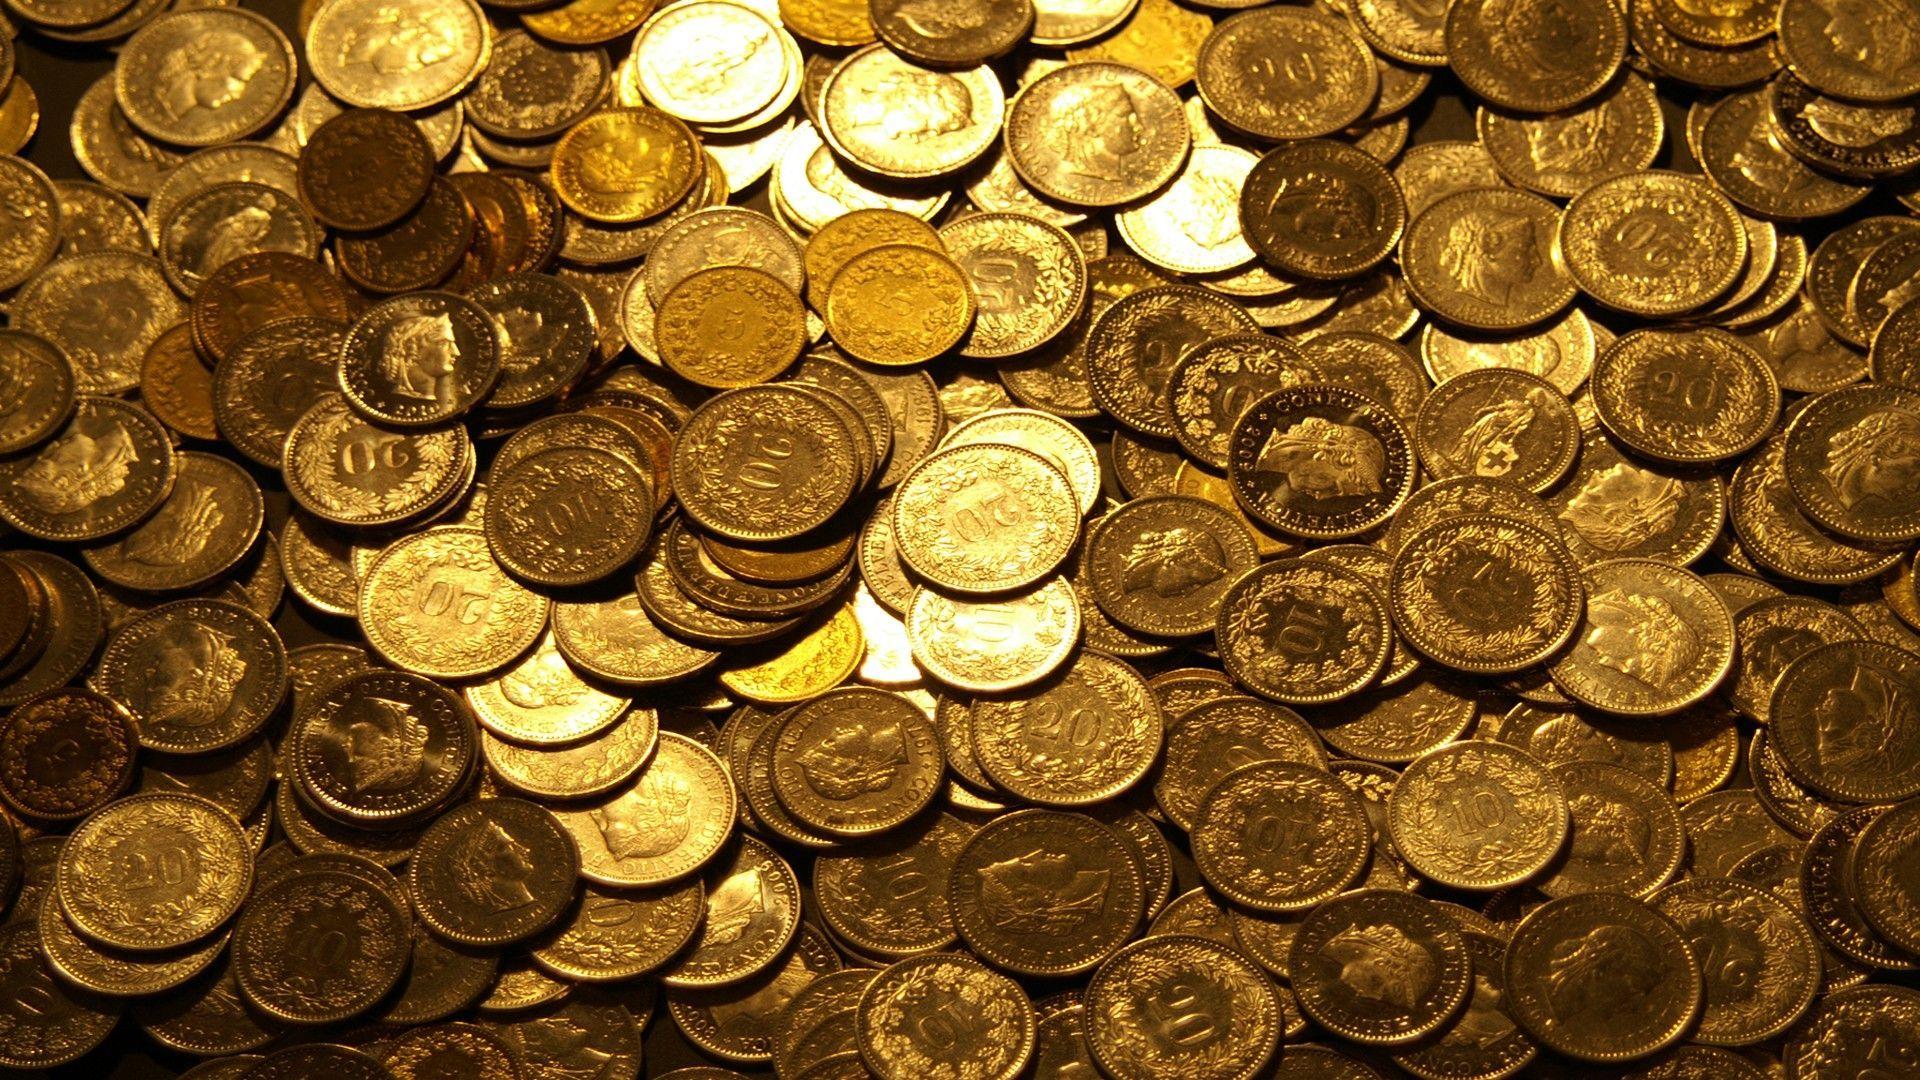 Coins Photos, Download The BEST Free Coins Stock Photos & HD Images